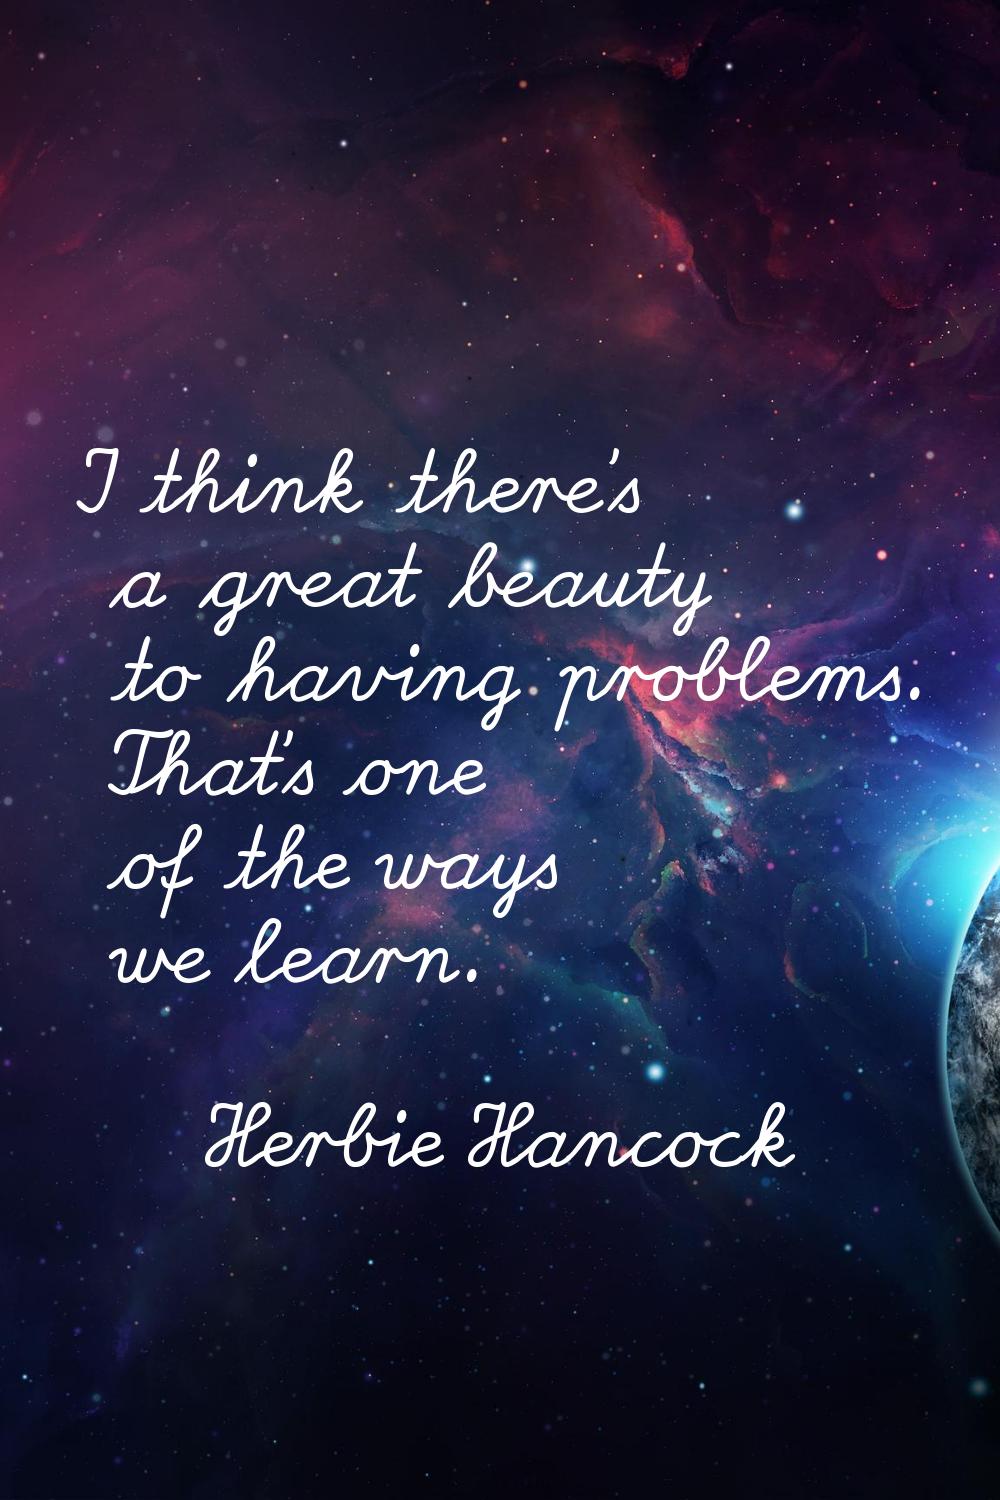 I think there's a great beauty to having problems. That's one of the ways we learn.